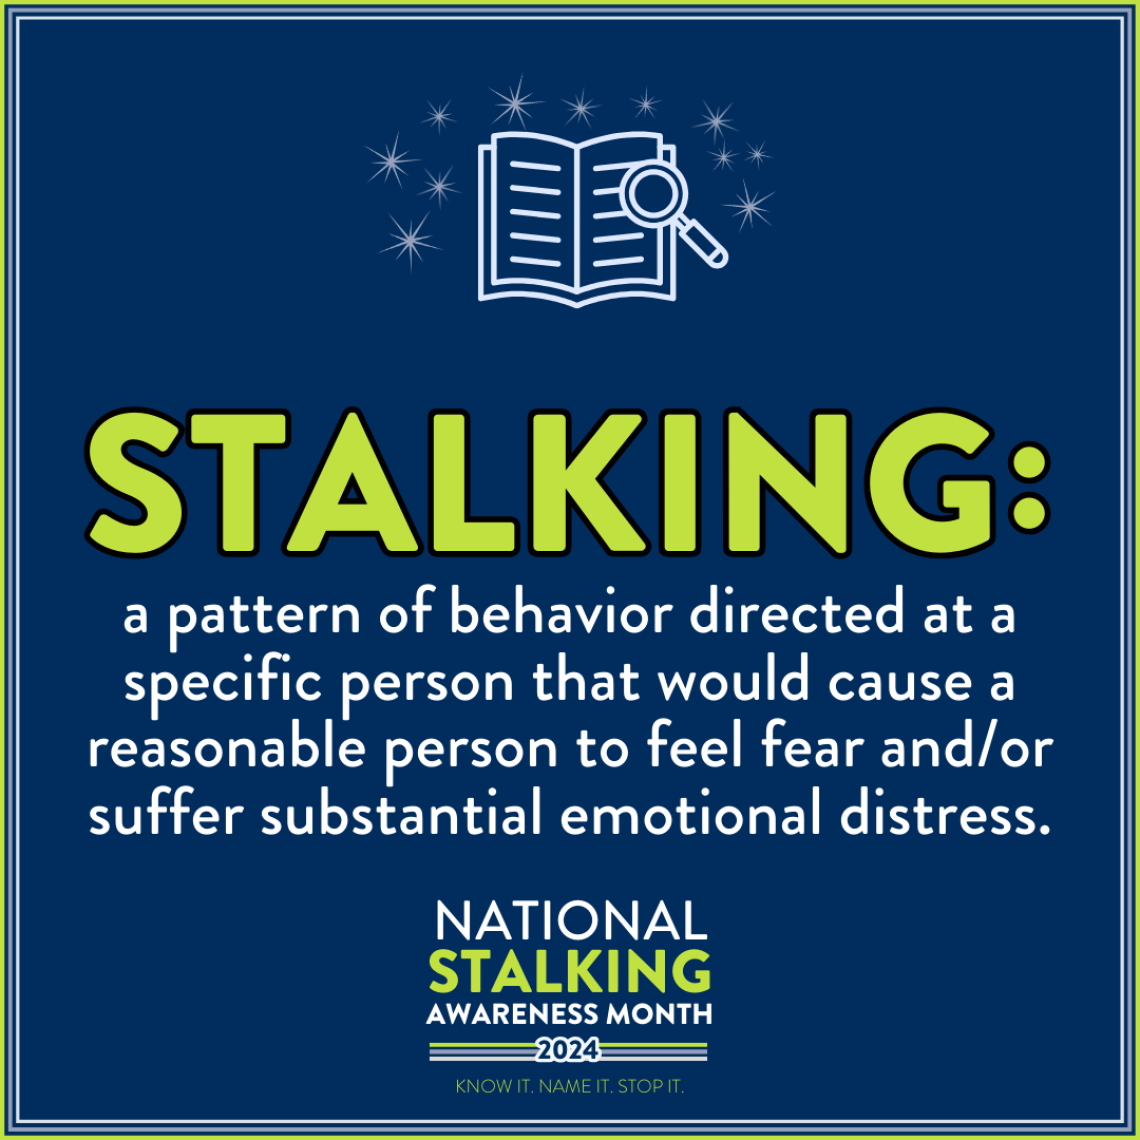 The definition of stalking in white text on a blue background.